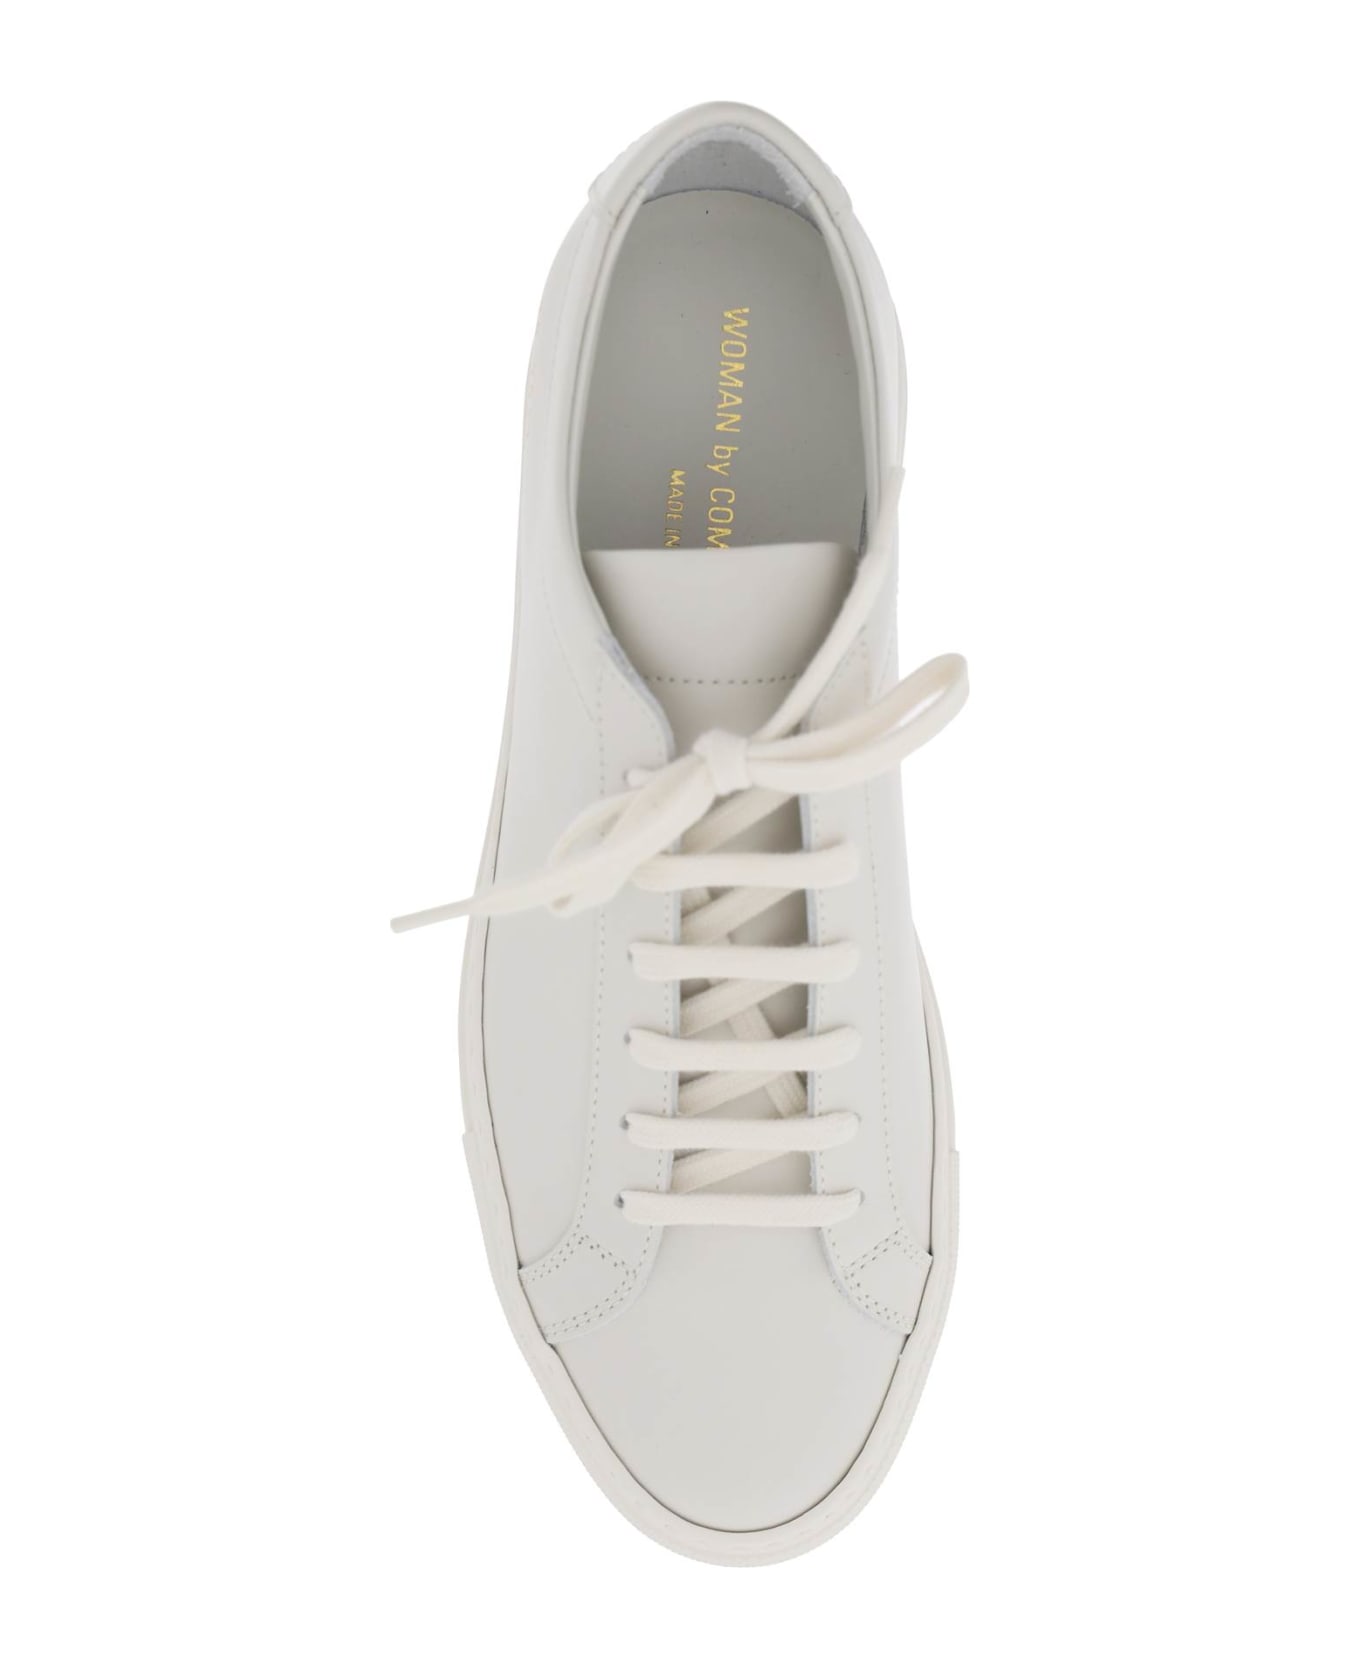 Common Projects Original Achilles Leather Sneakers - Warm white スニーカー